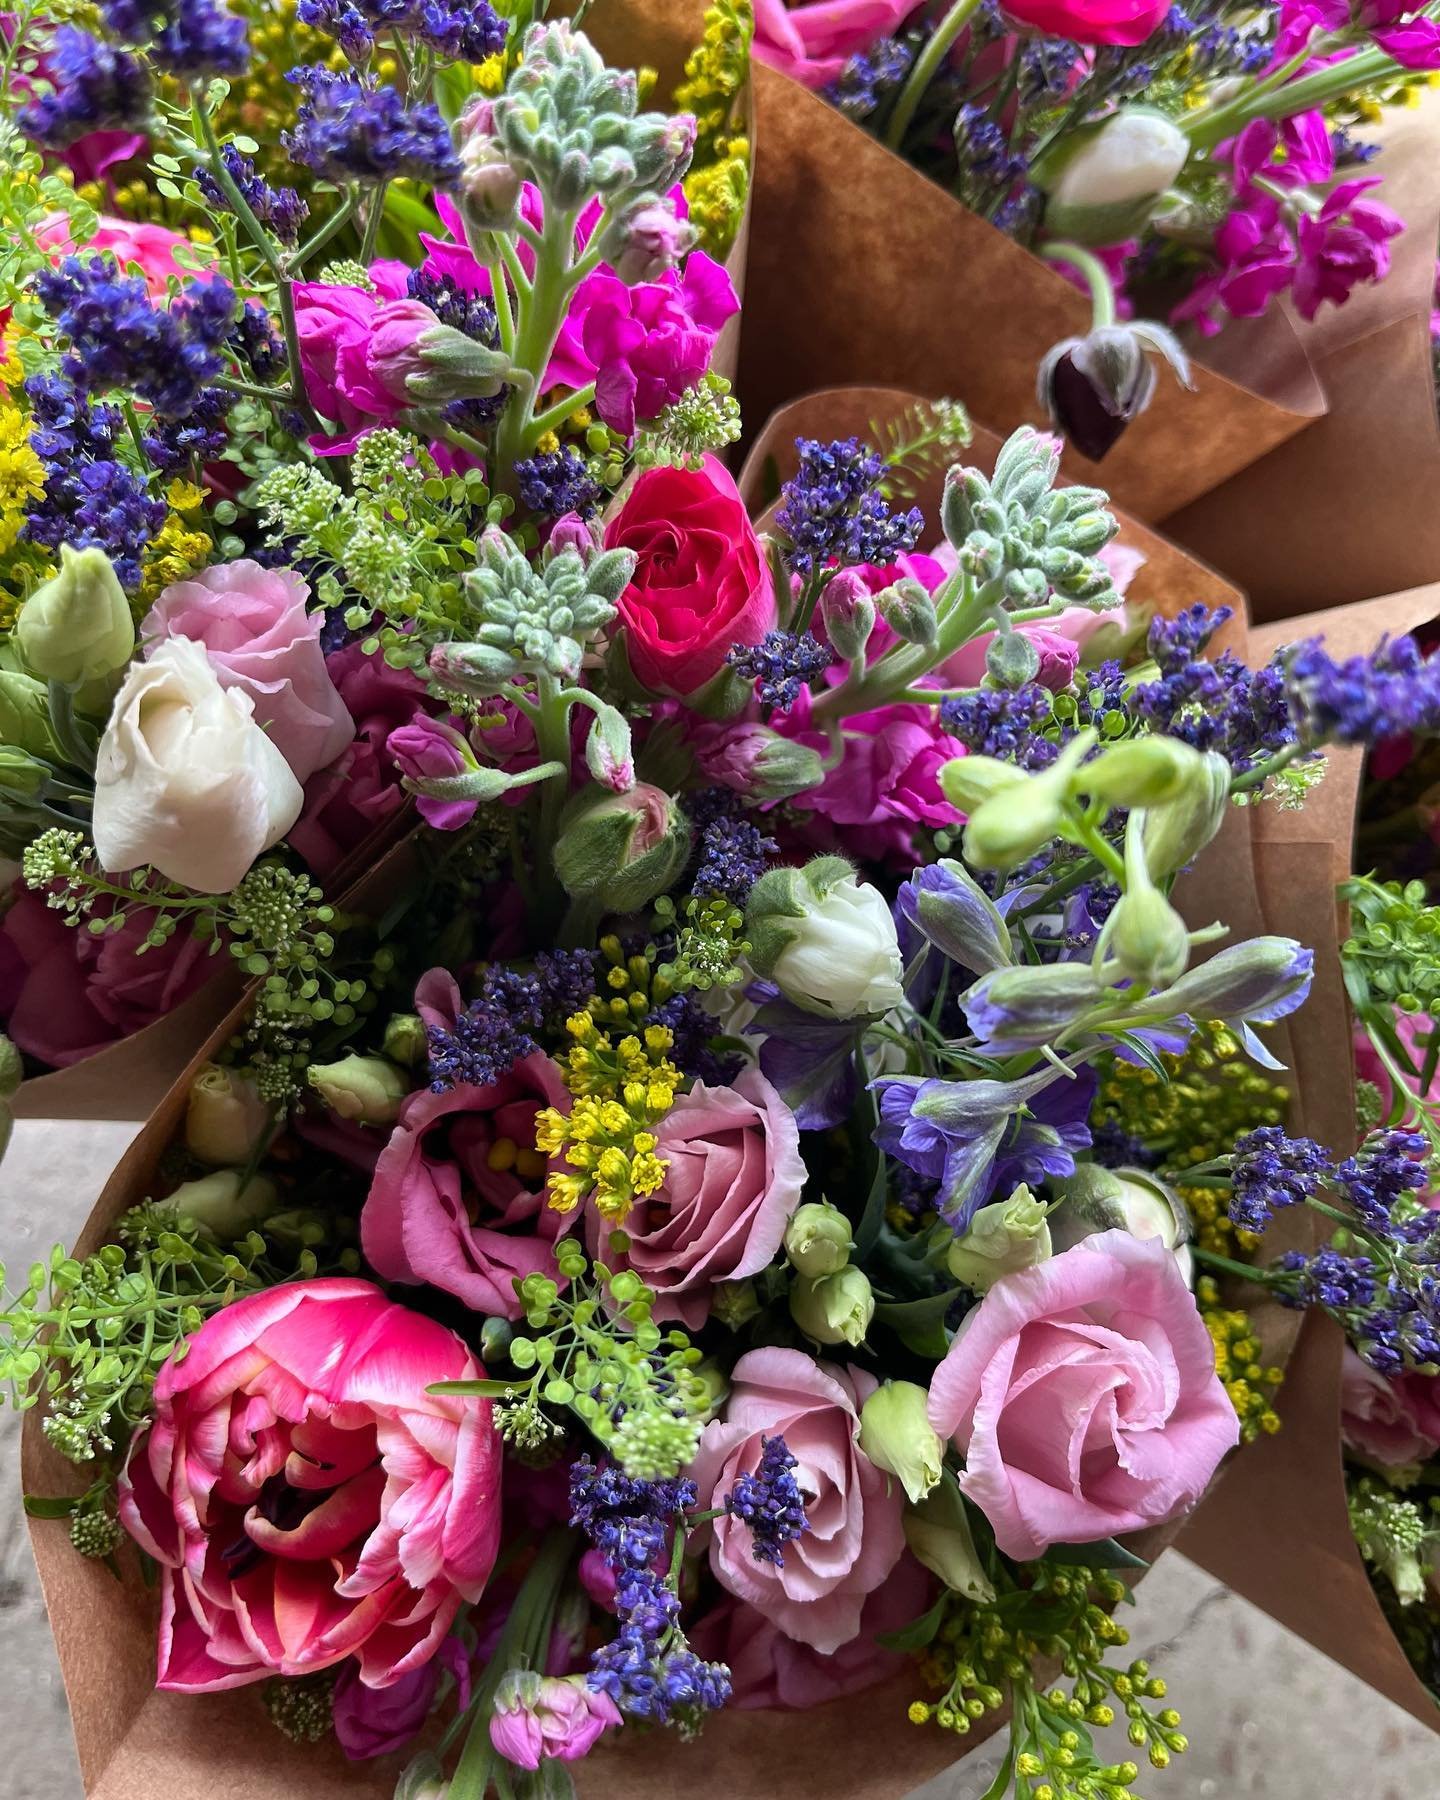 🌷Mother's Day Bouquets🌷 Surprise the mom in your life with beautiful spring flowers! Bouquets will include a mix of tulips and ranunculus from our farm along with other vibrant blooms, plus a handmade card 💌 
Visit our website to pre-order by May 